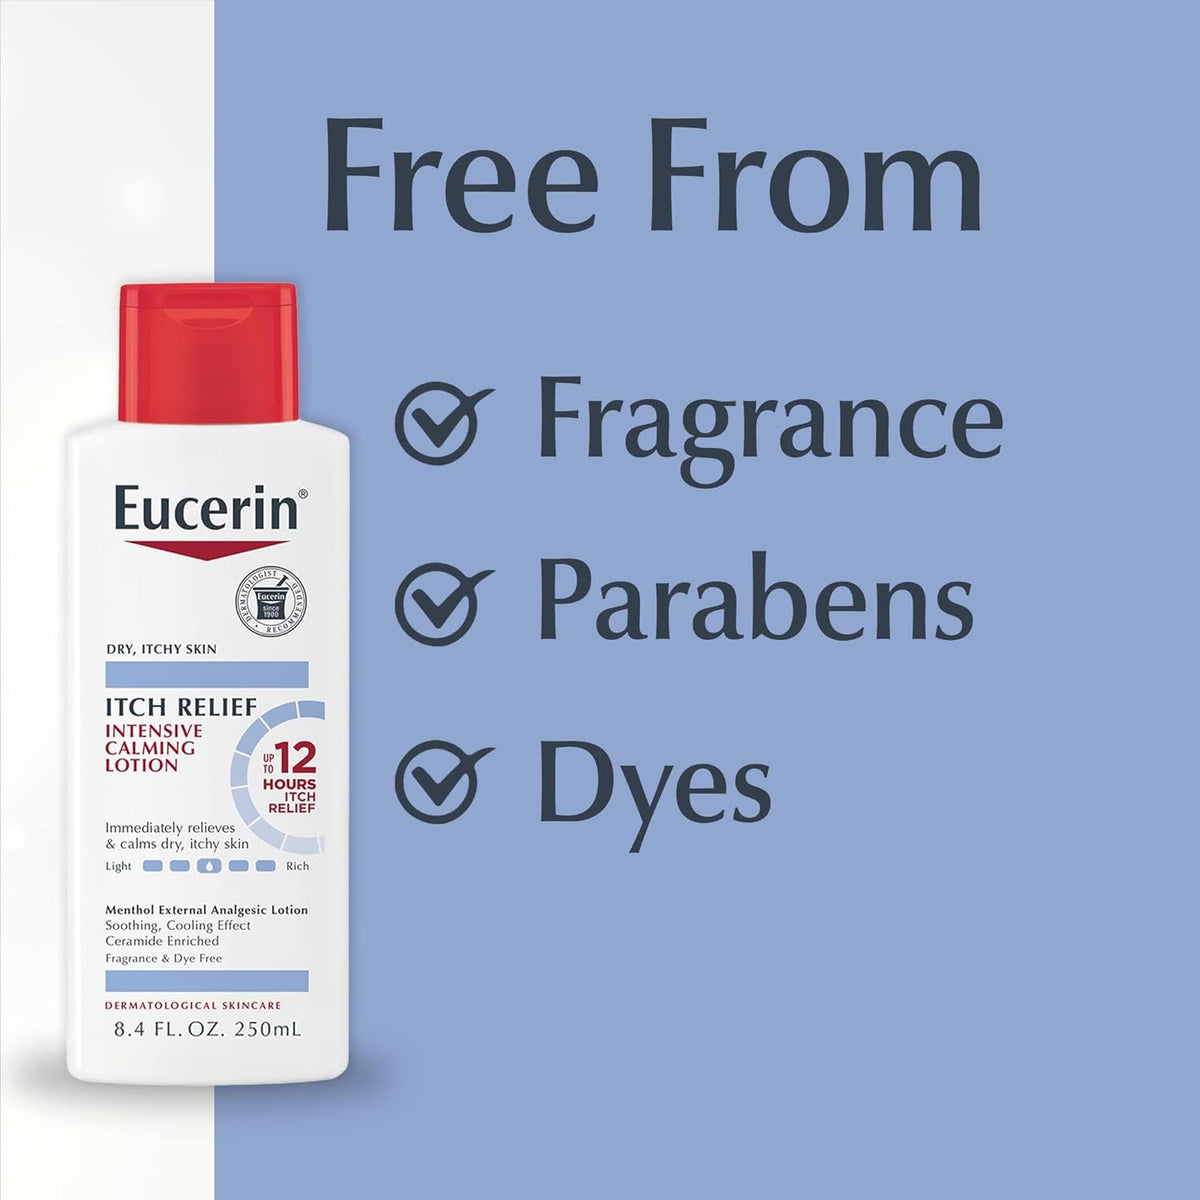 Eucerin - Itch Relief Intensive Skin Calming Lotion 250ml